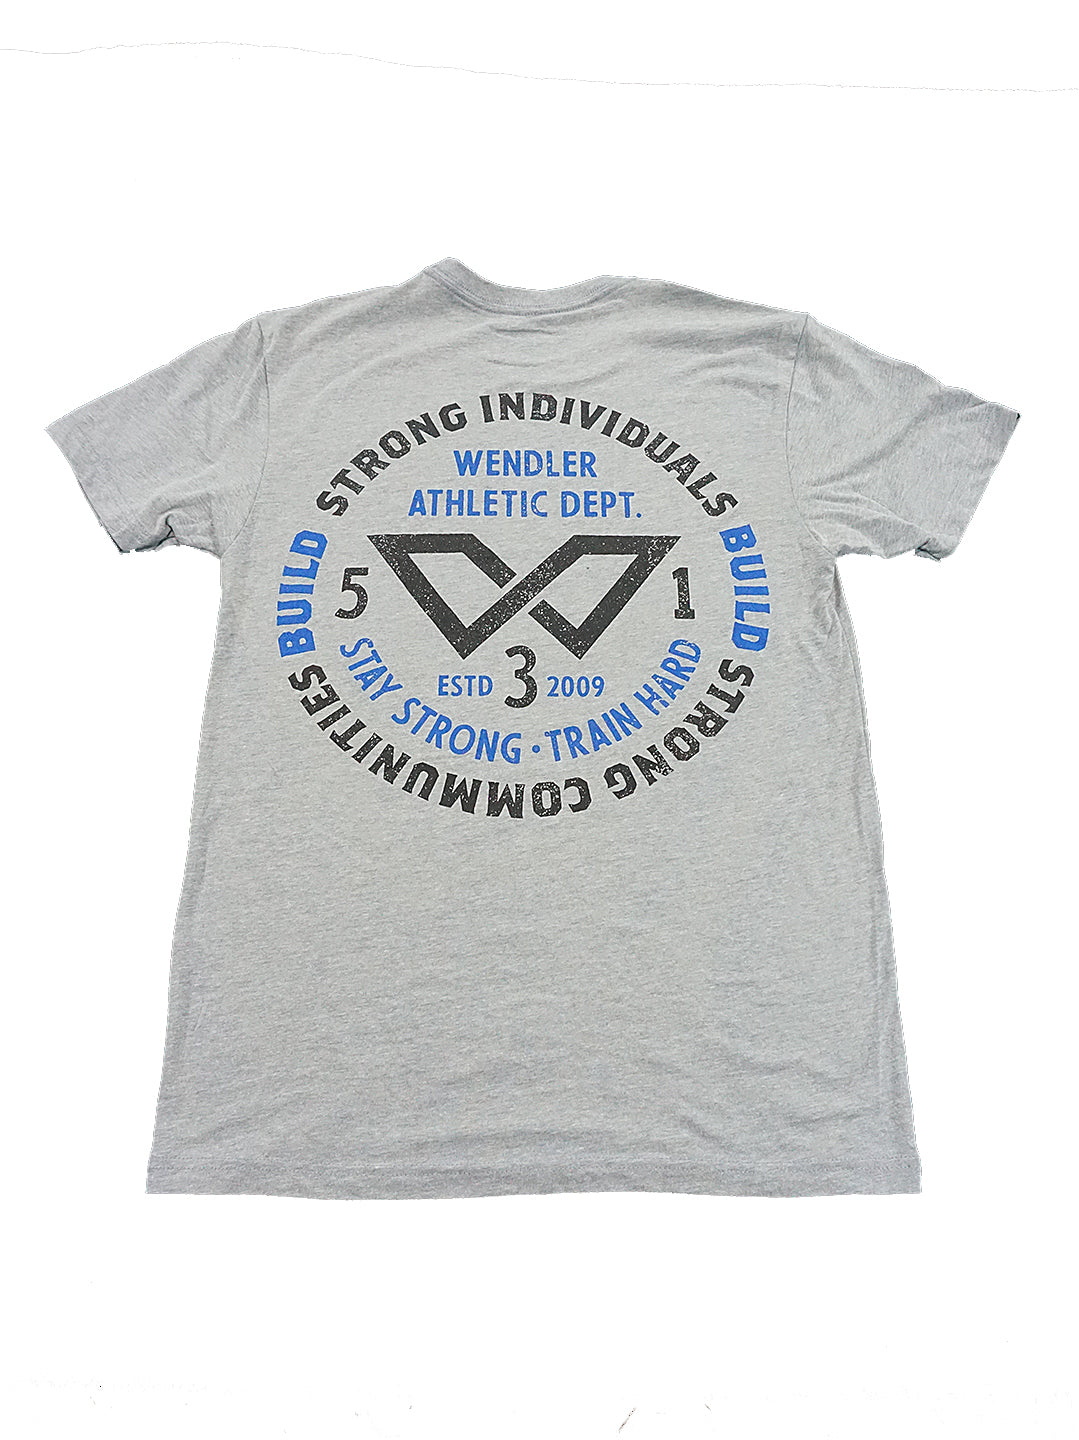 Strong Individuals Shirt Grey w/ Black and Blue